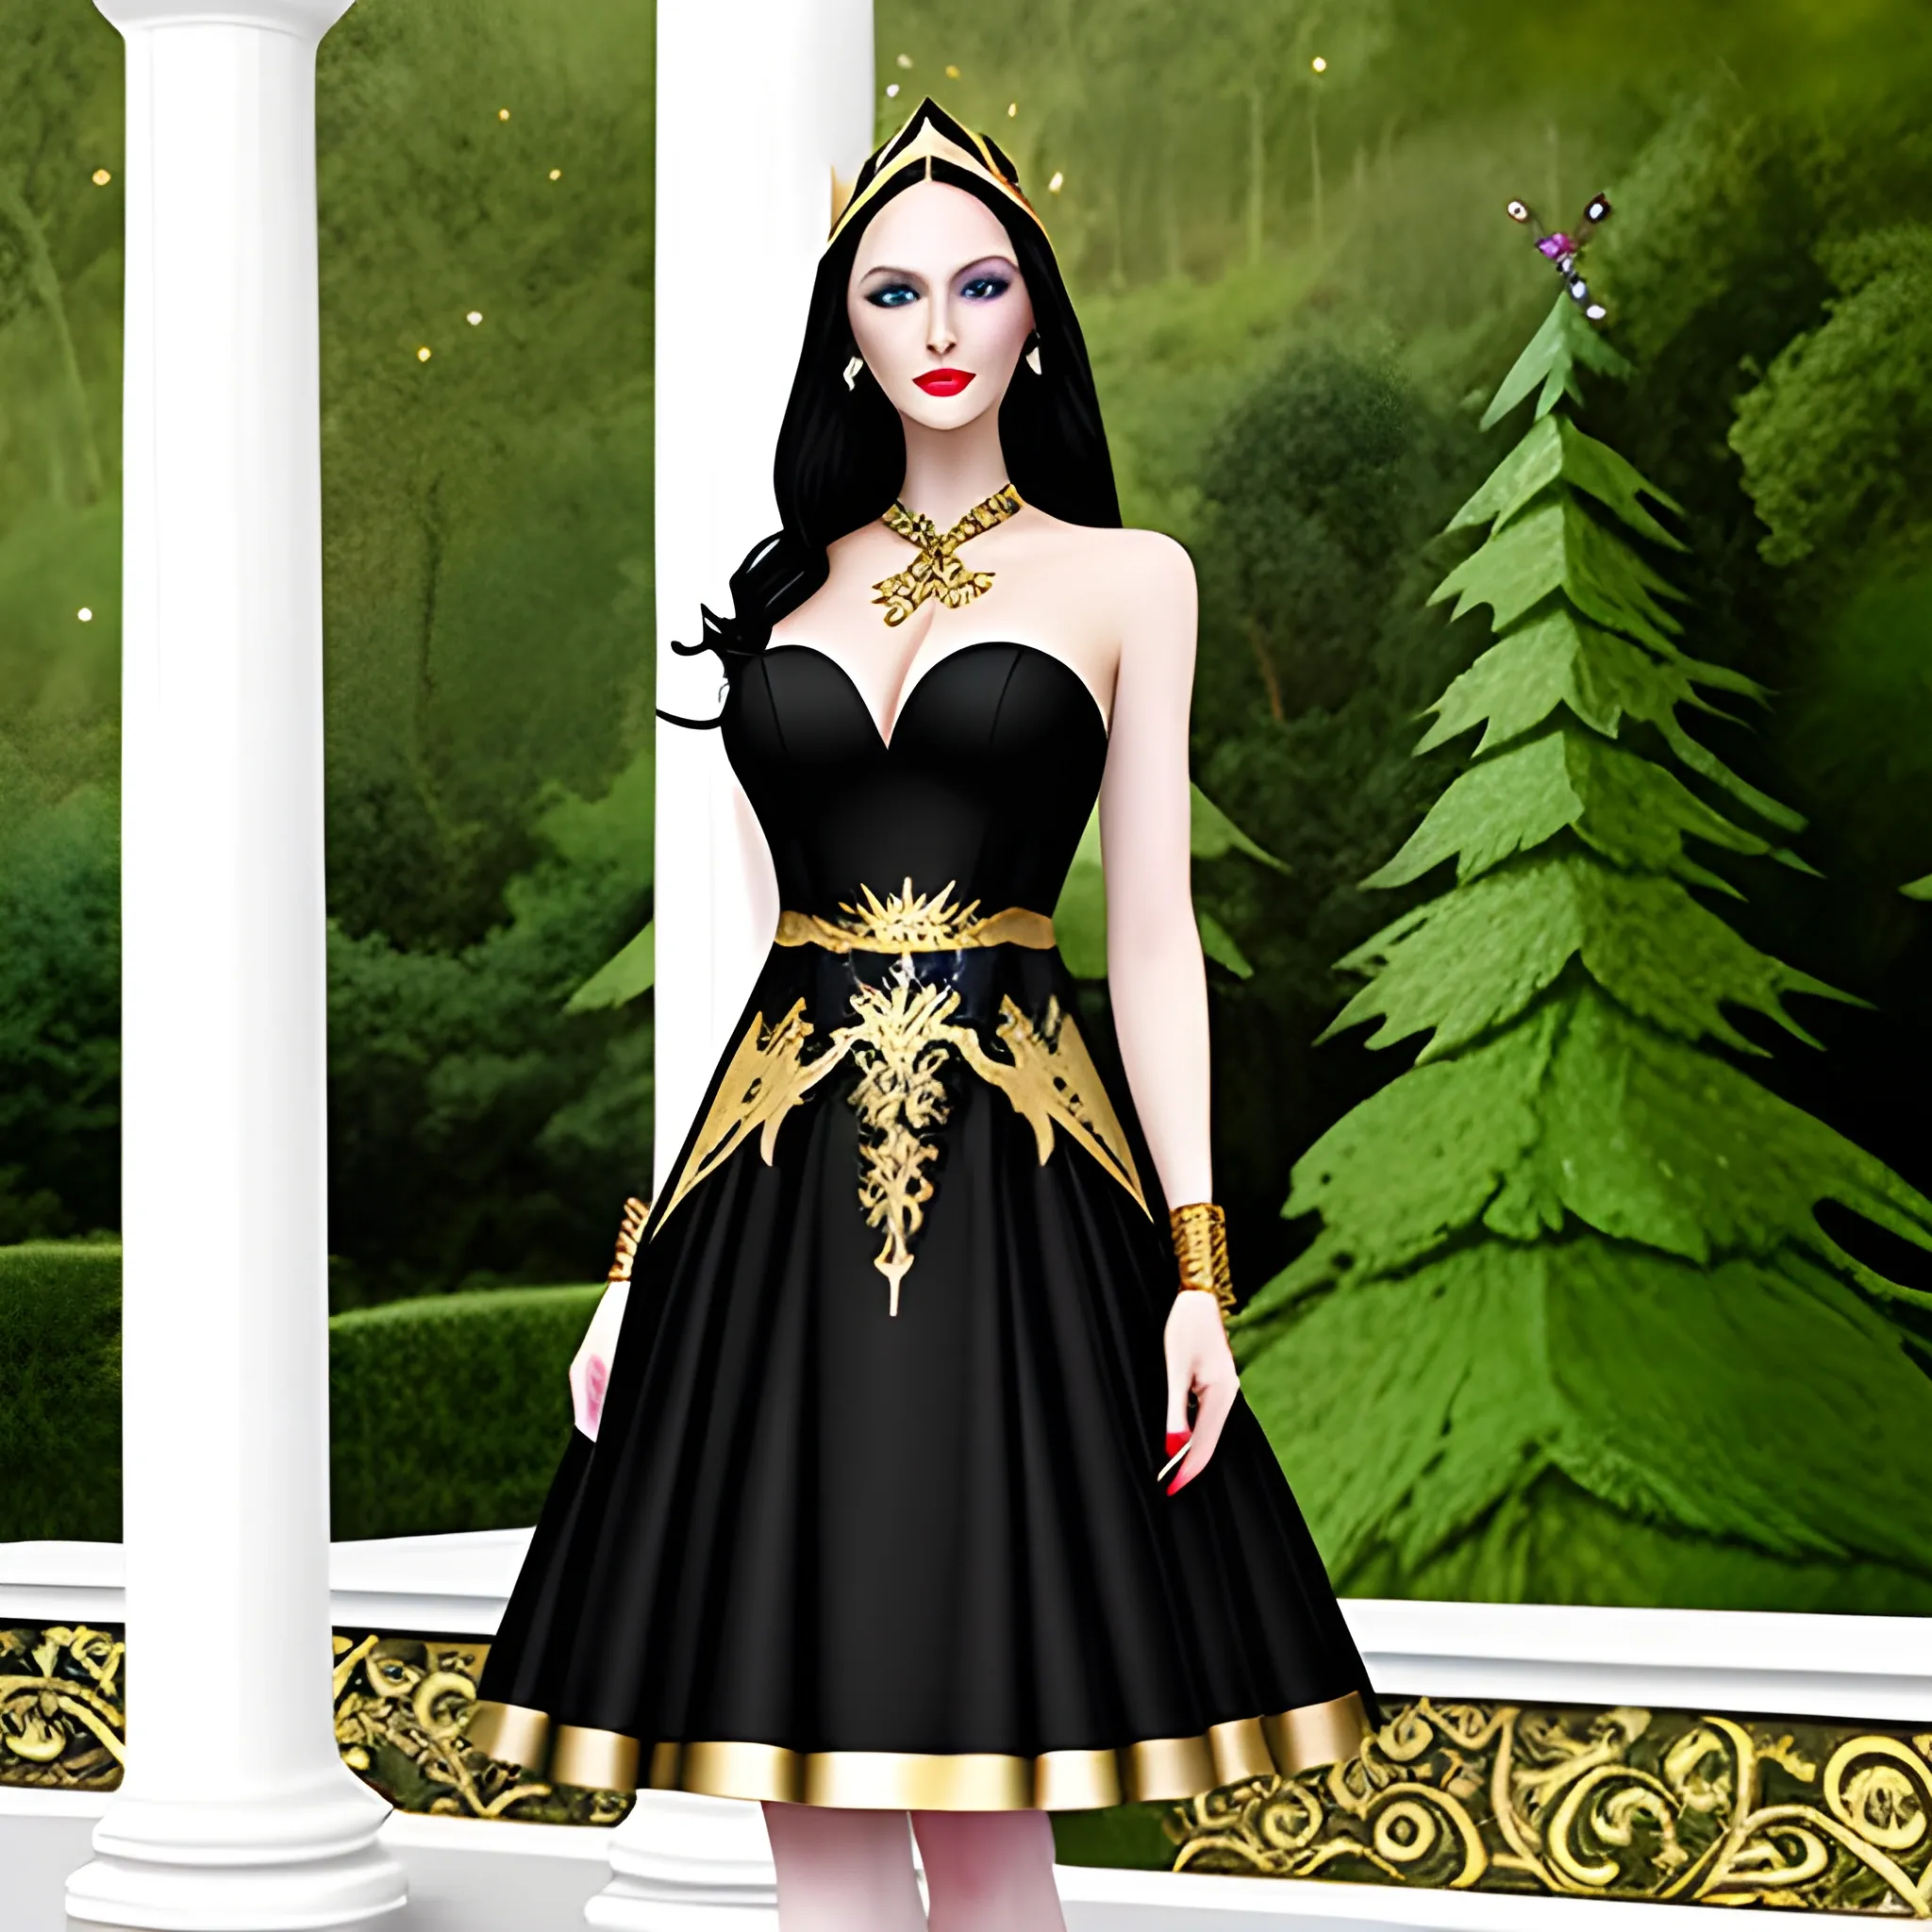 Share 253+ black gown with accessories